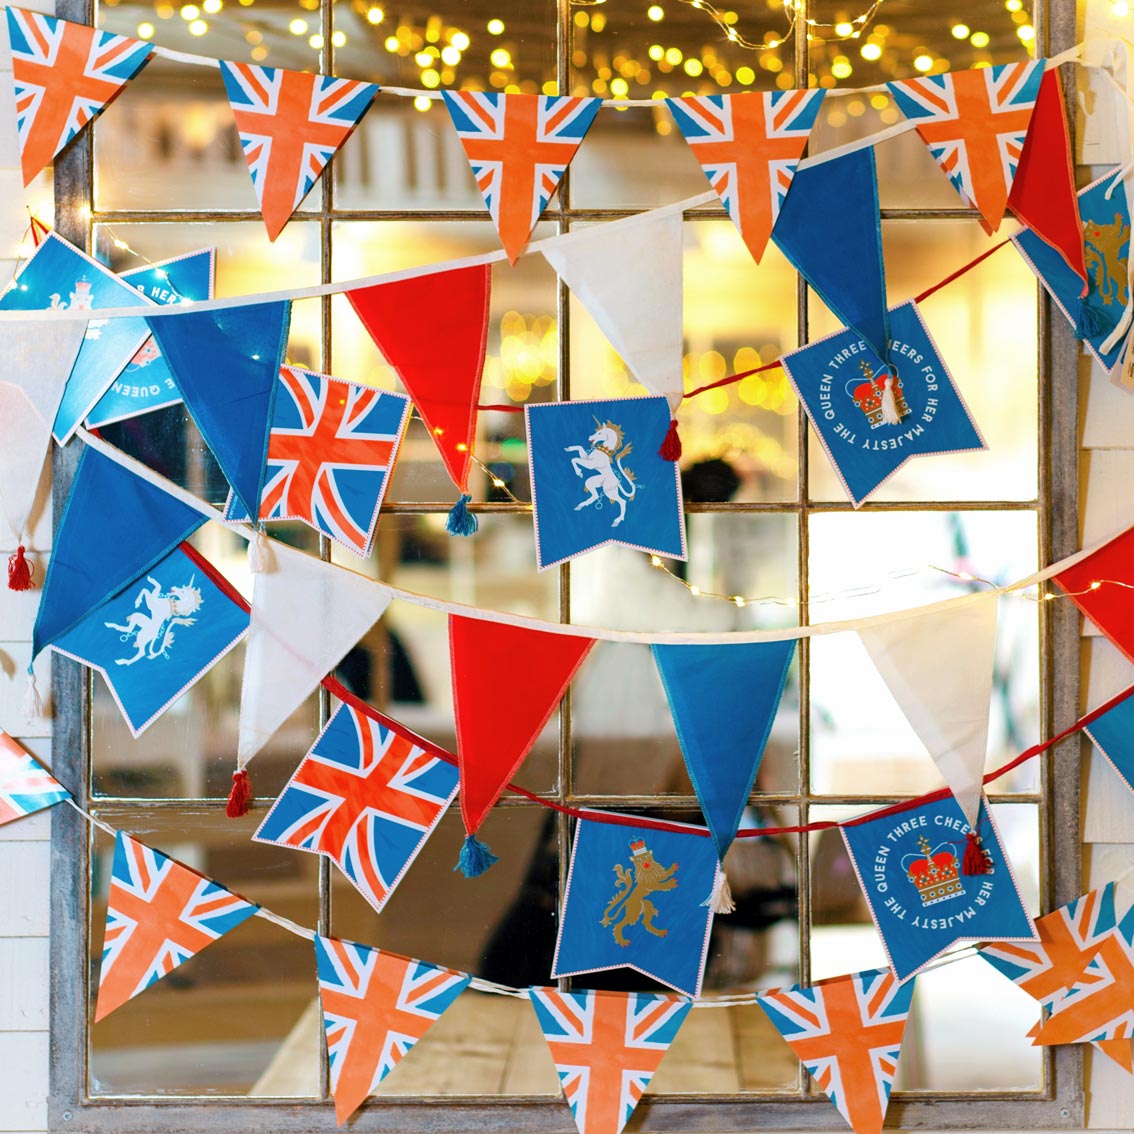 window filled with union jack bunting